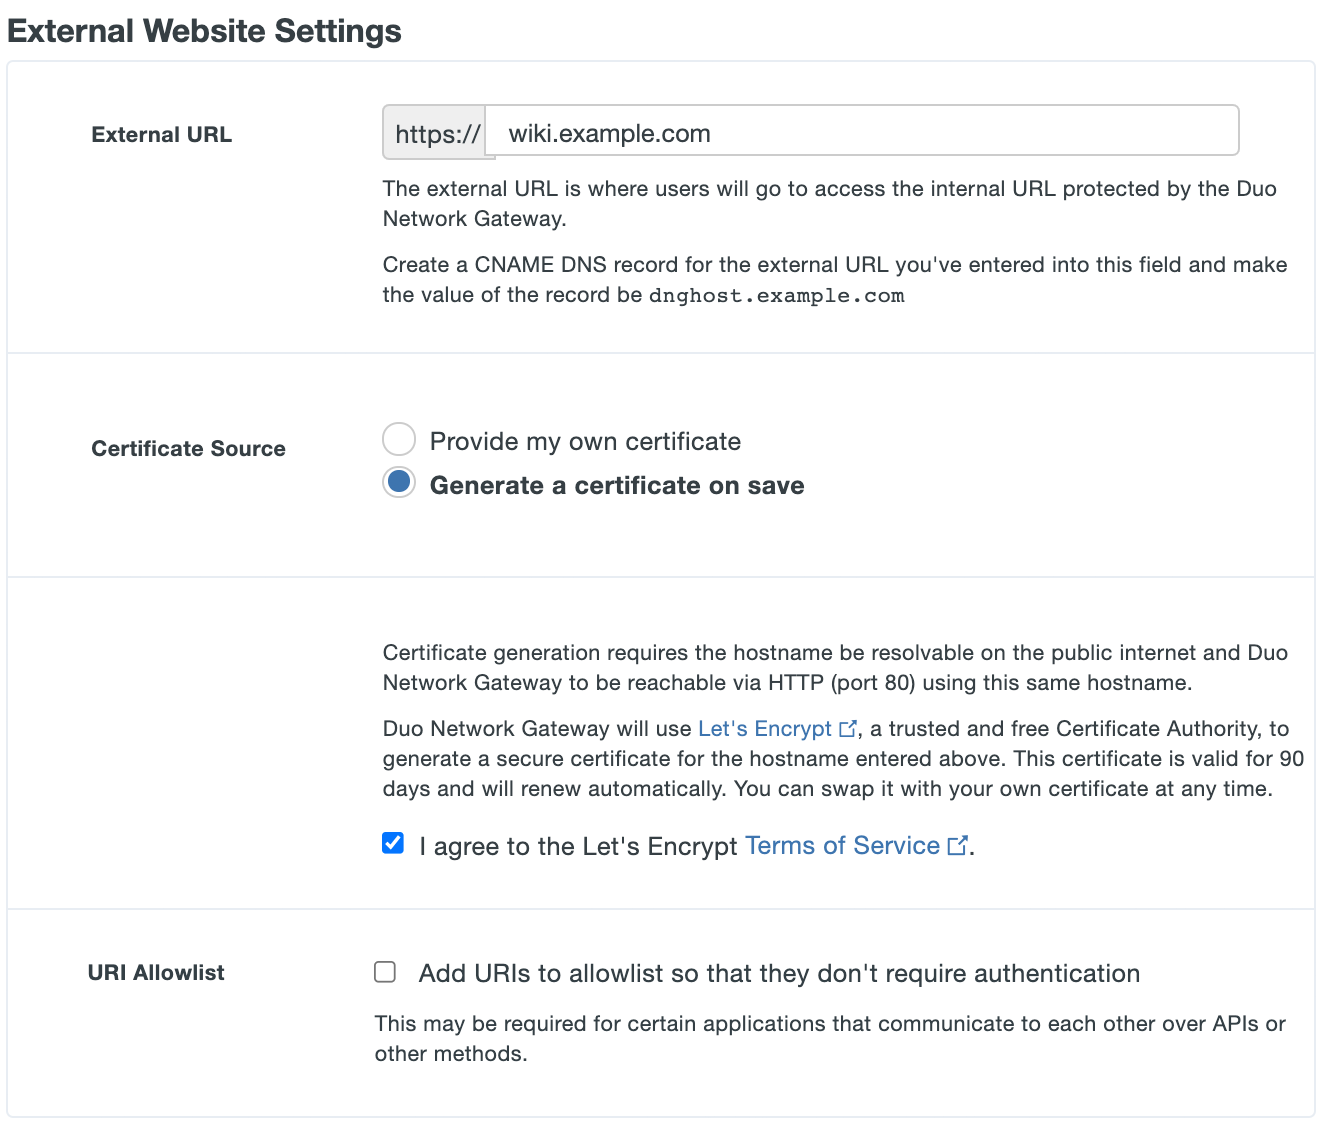 Configure external settings for Duo Network Gateway Application with Let's Encrypt